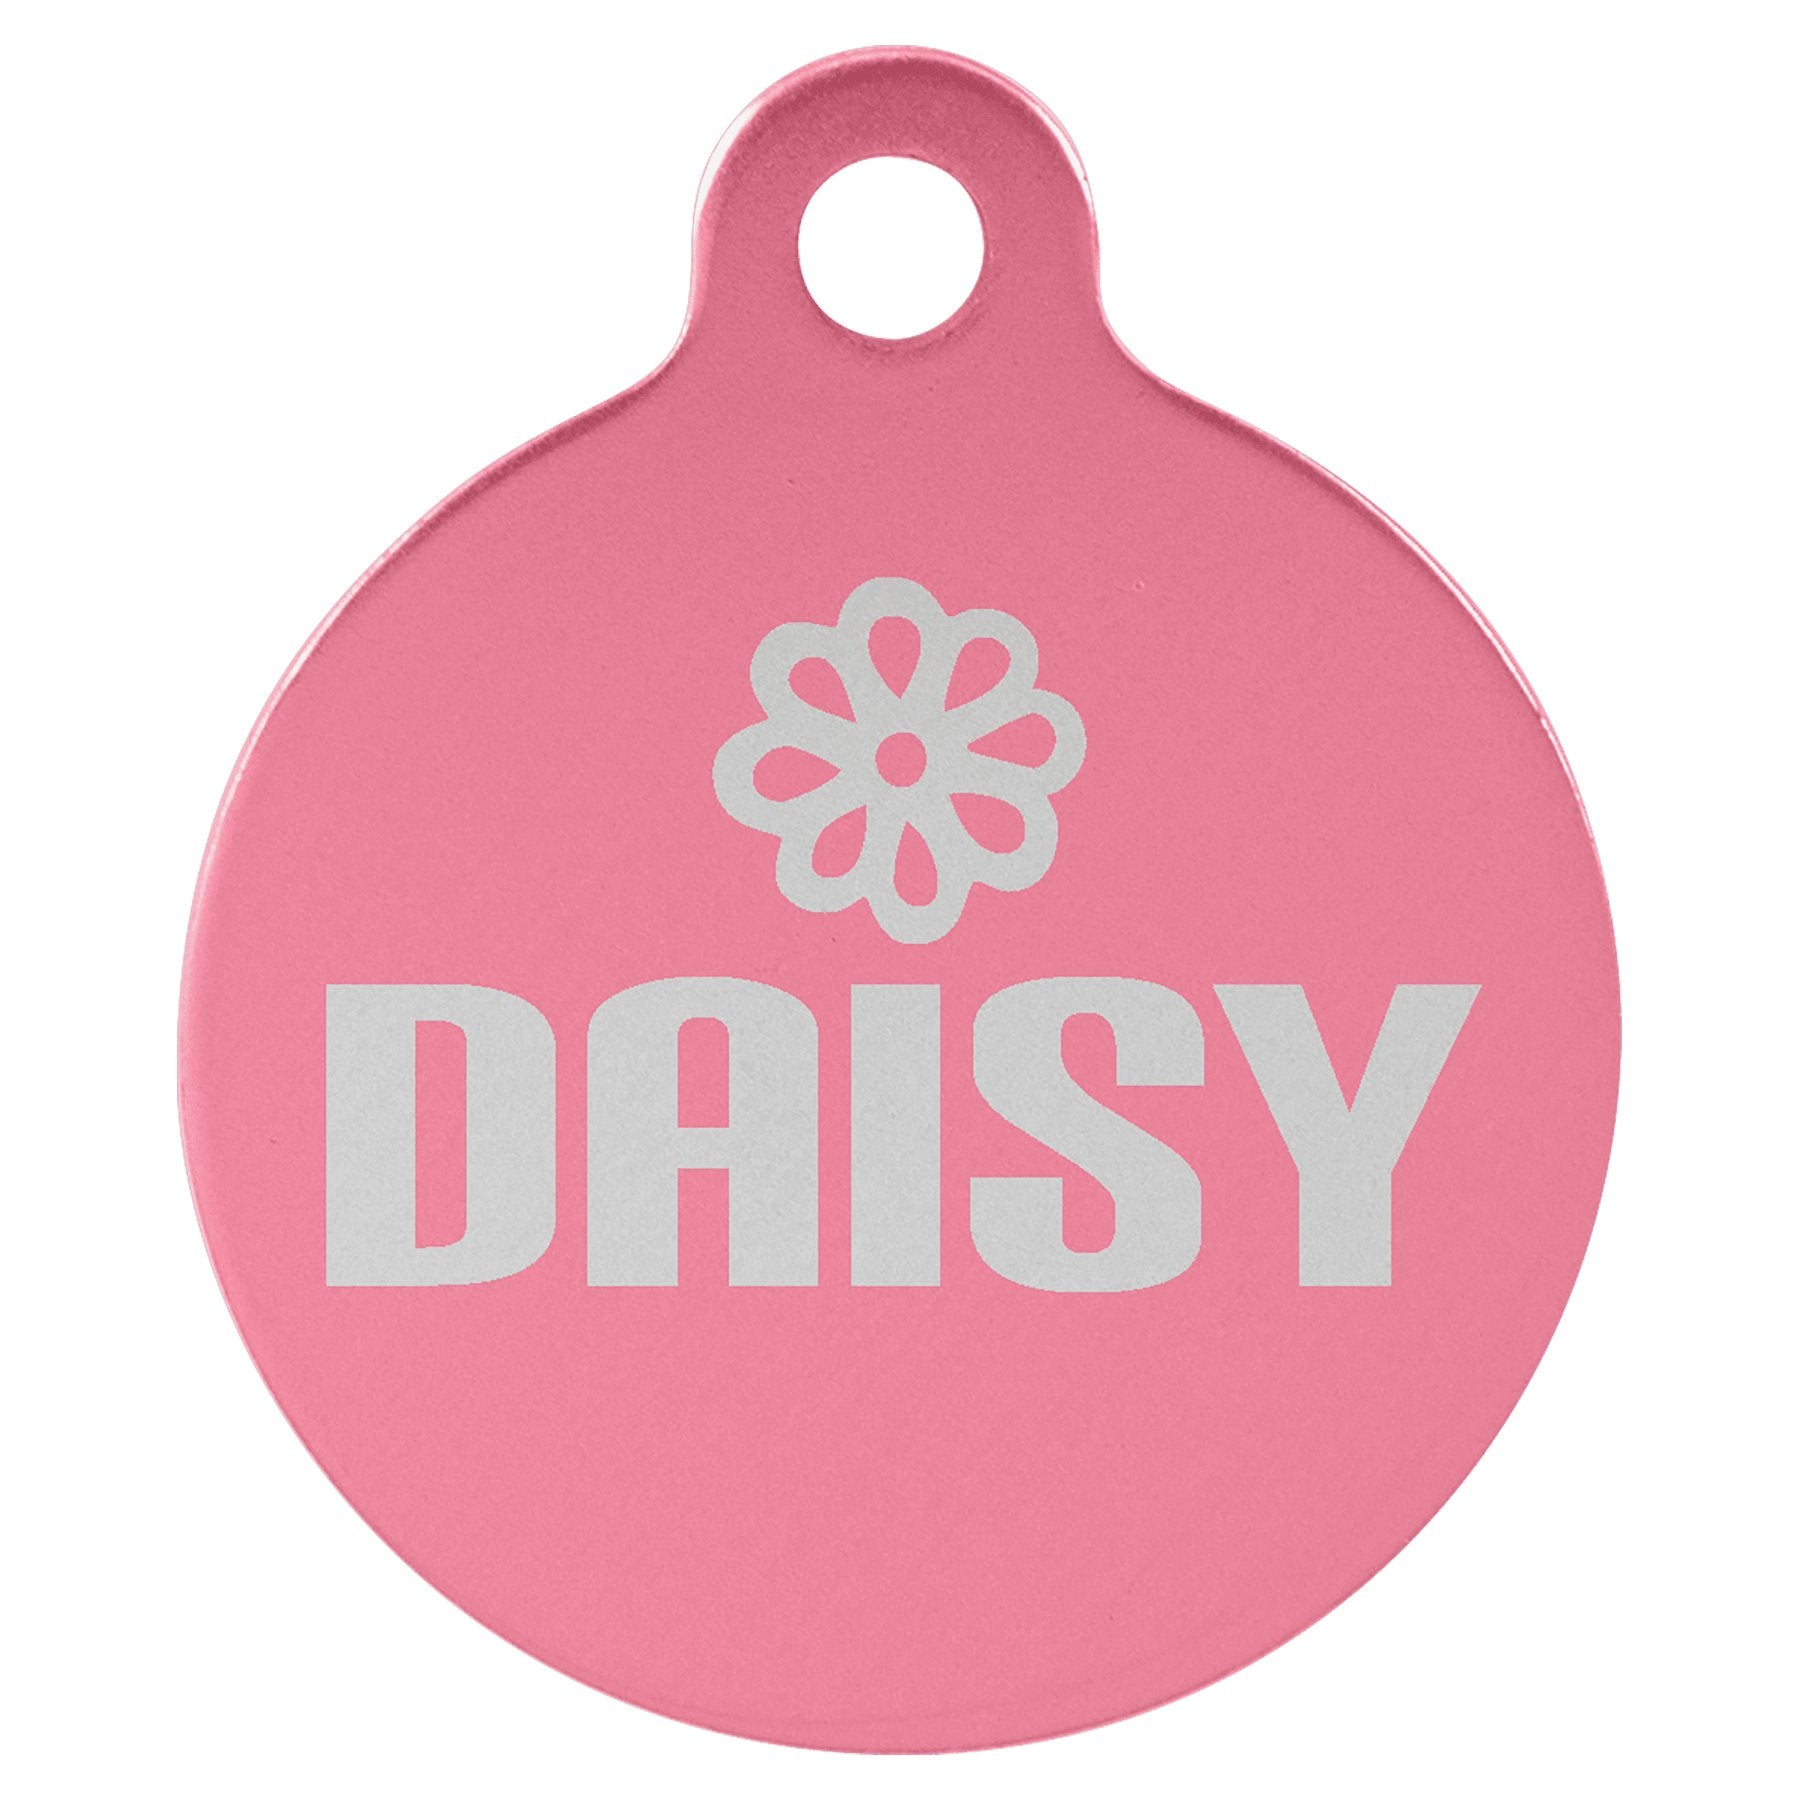 Round Pet Tags - Everlasting Etchings, LLC